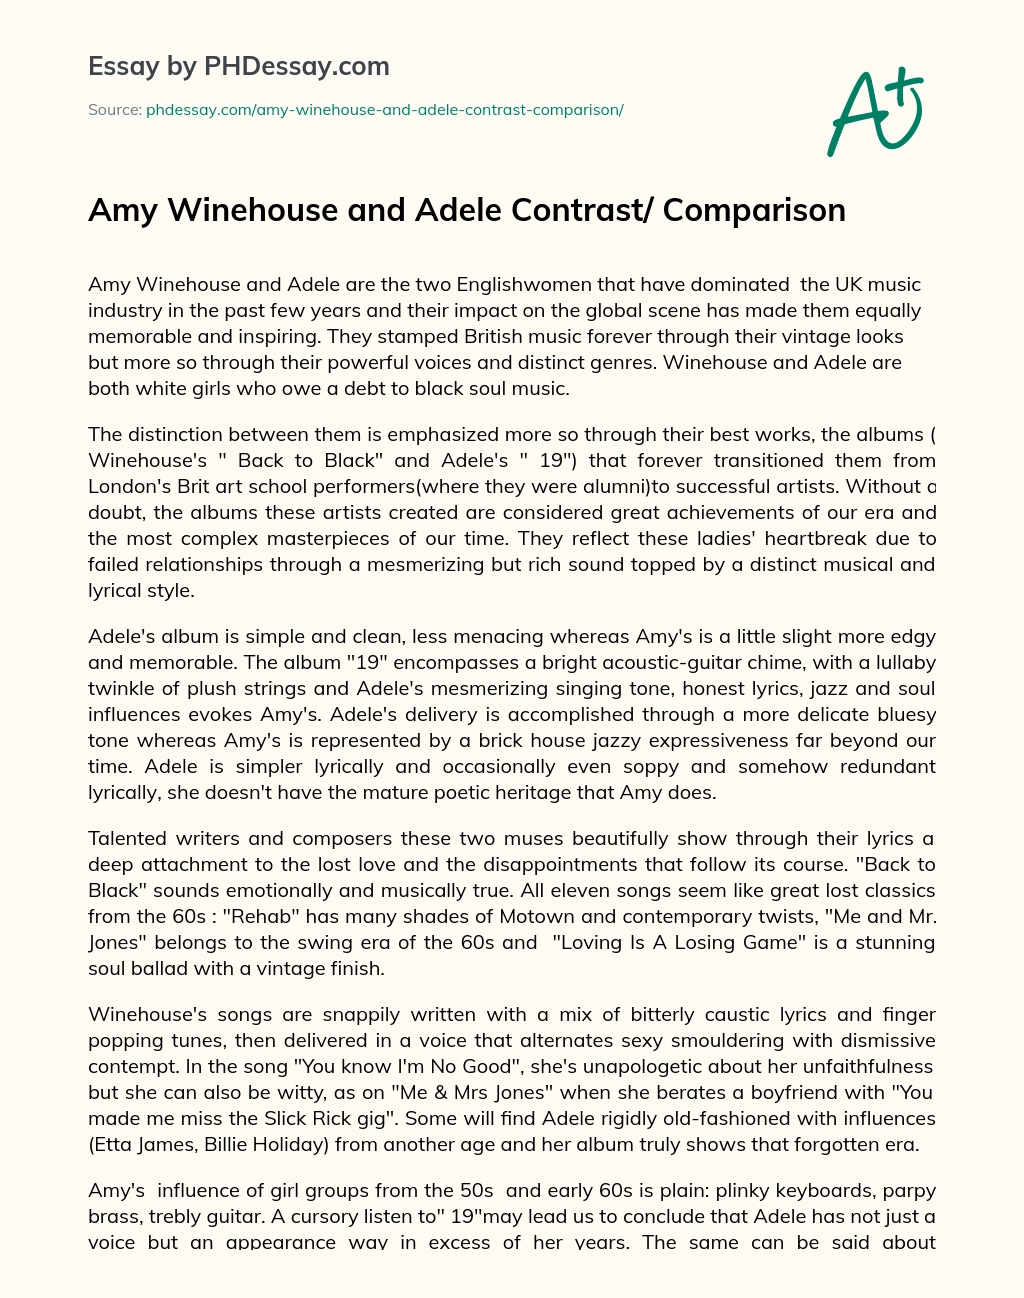 Amy Winehouse and Adele Contrast/ Comparison essay